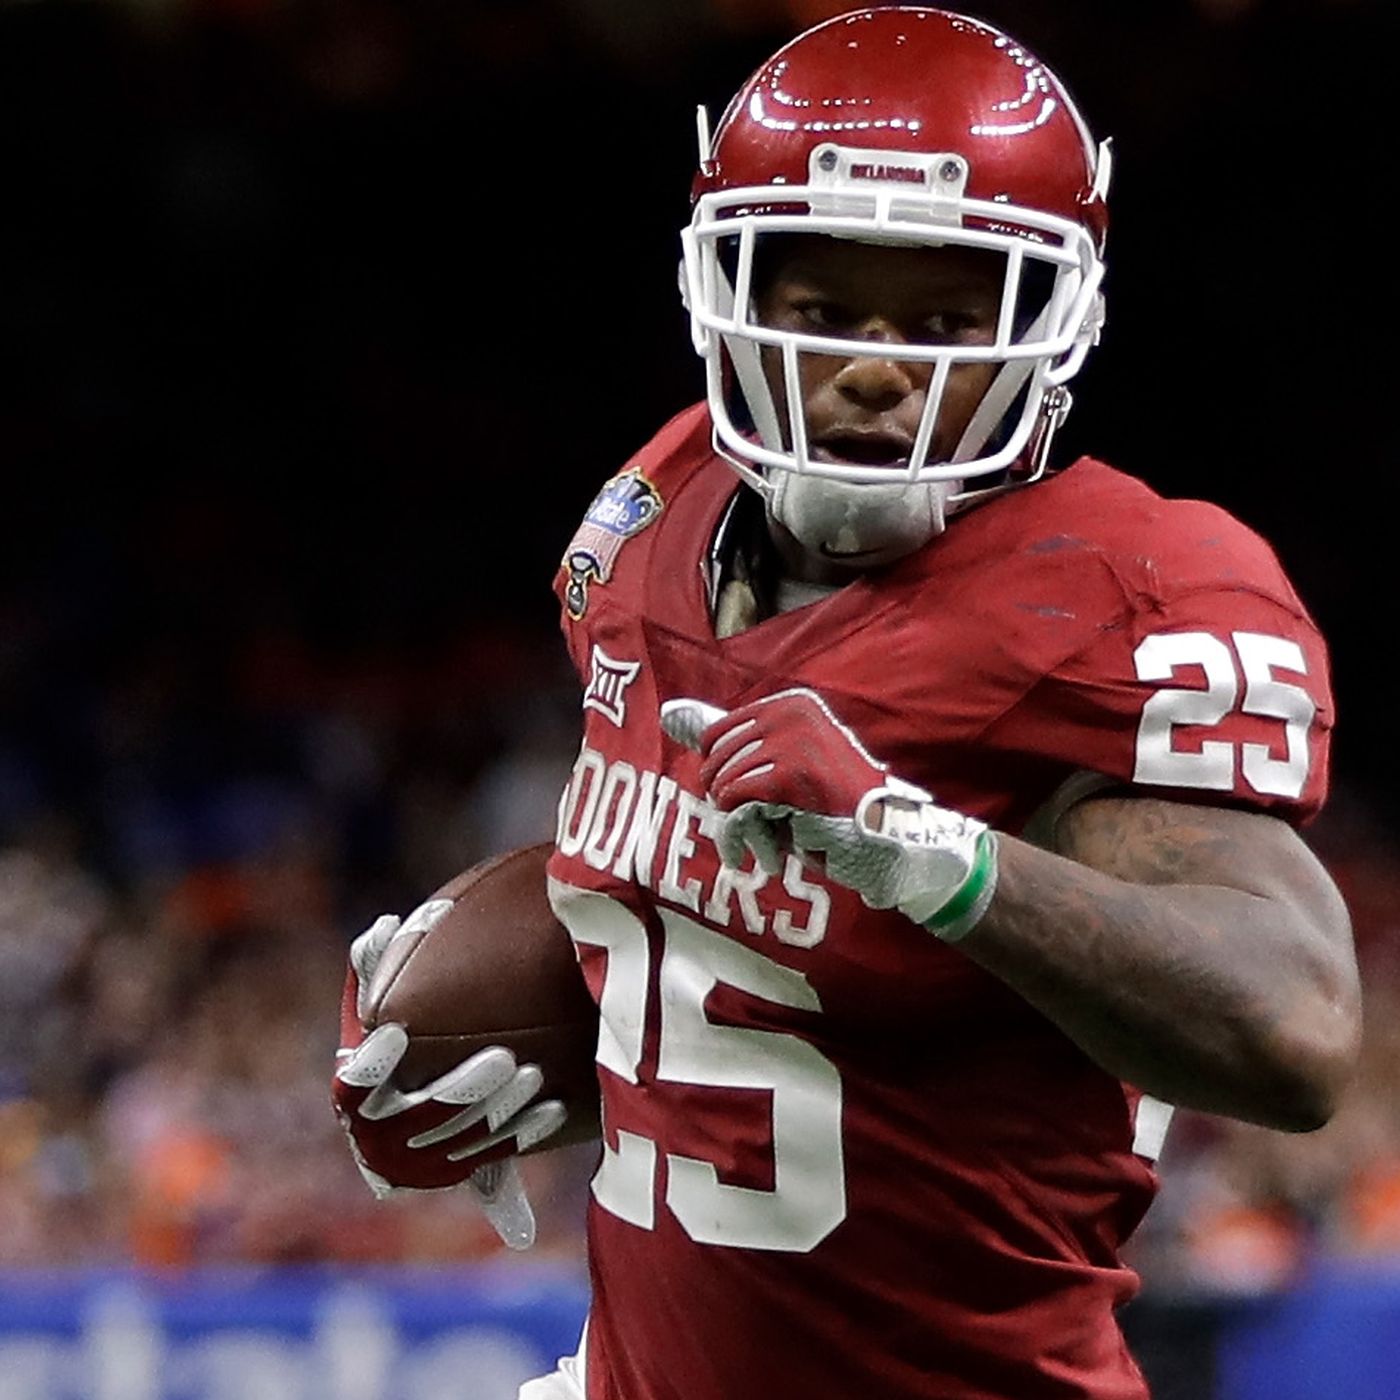 Joe Mixon punched a woman, and it's on video. Here's the full